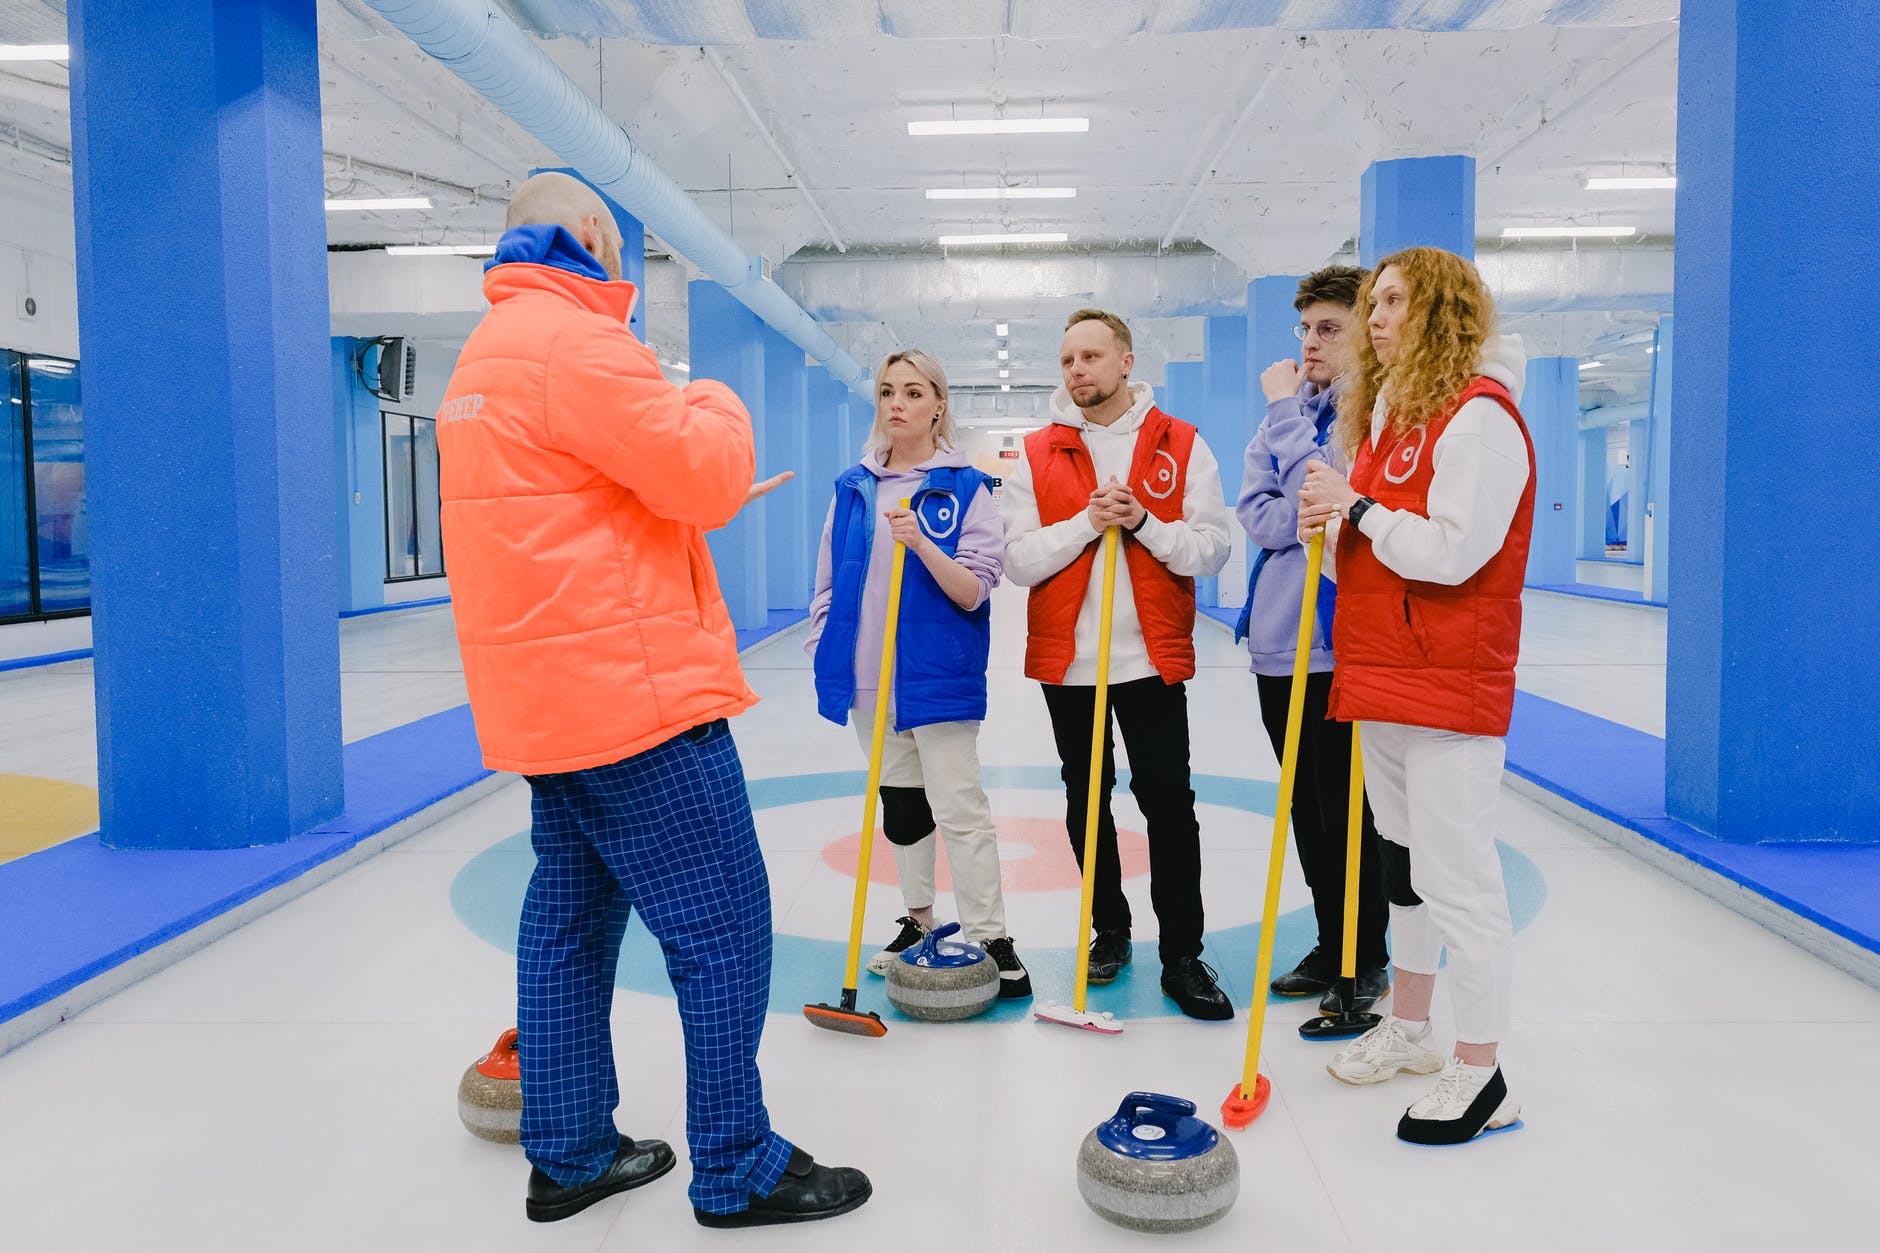 curling team standing band talking with trainer on ice rink